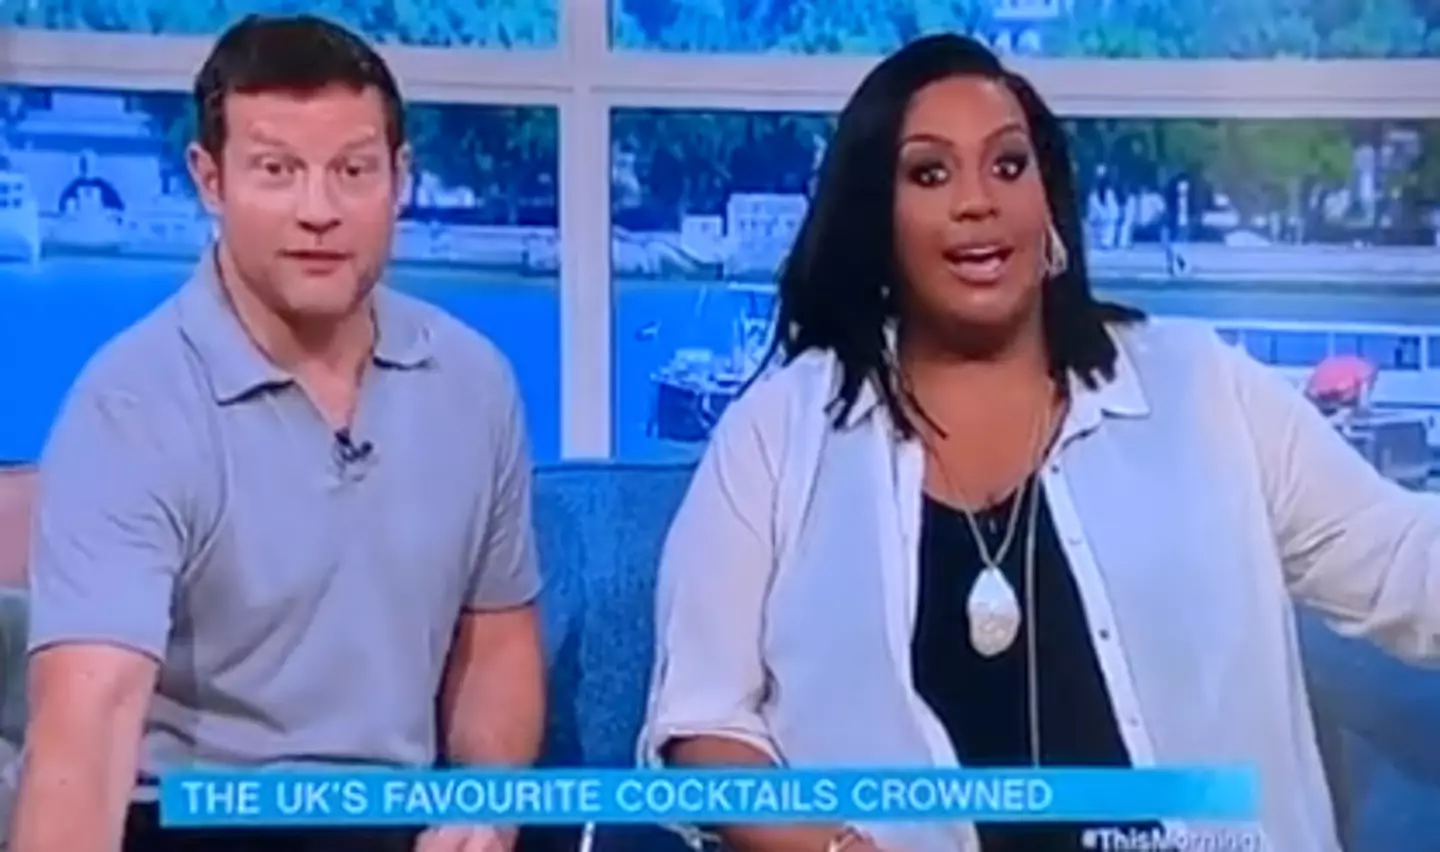 Viewers found the moment hilariously 'chaotic'.